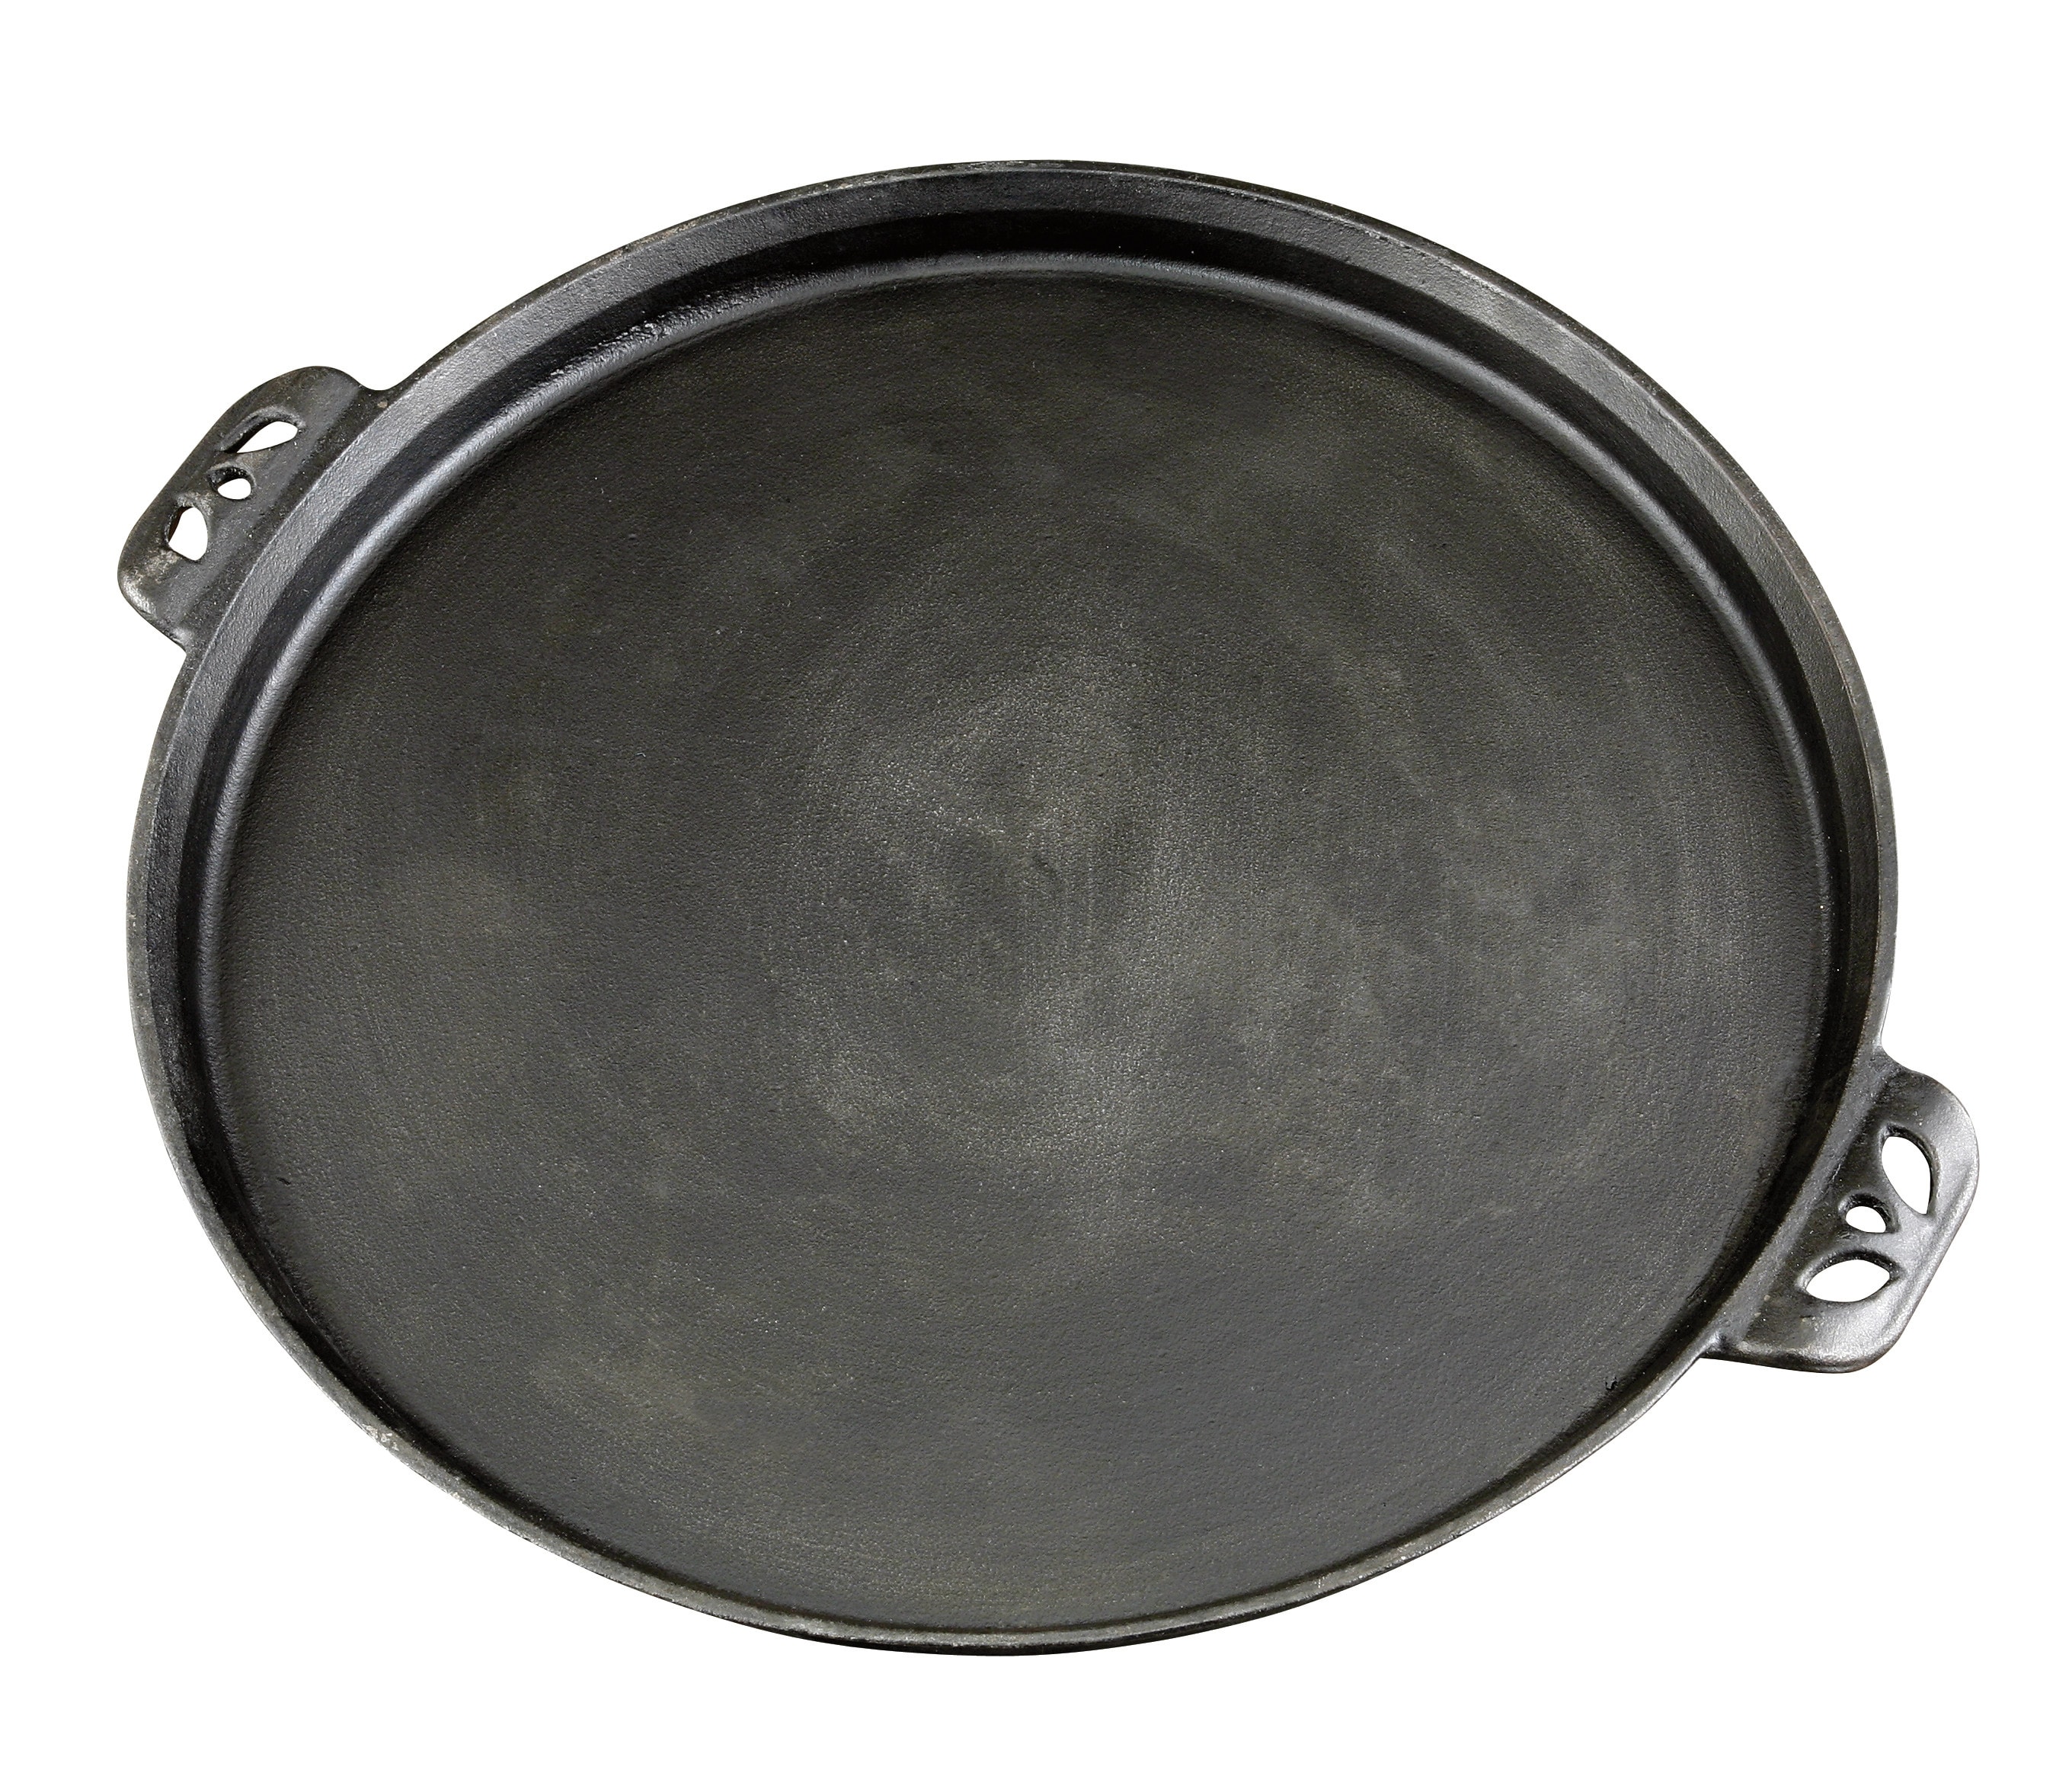 Kenmore 14 in. Cast-Iron Pizza Pan, Black